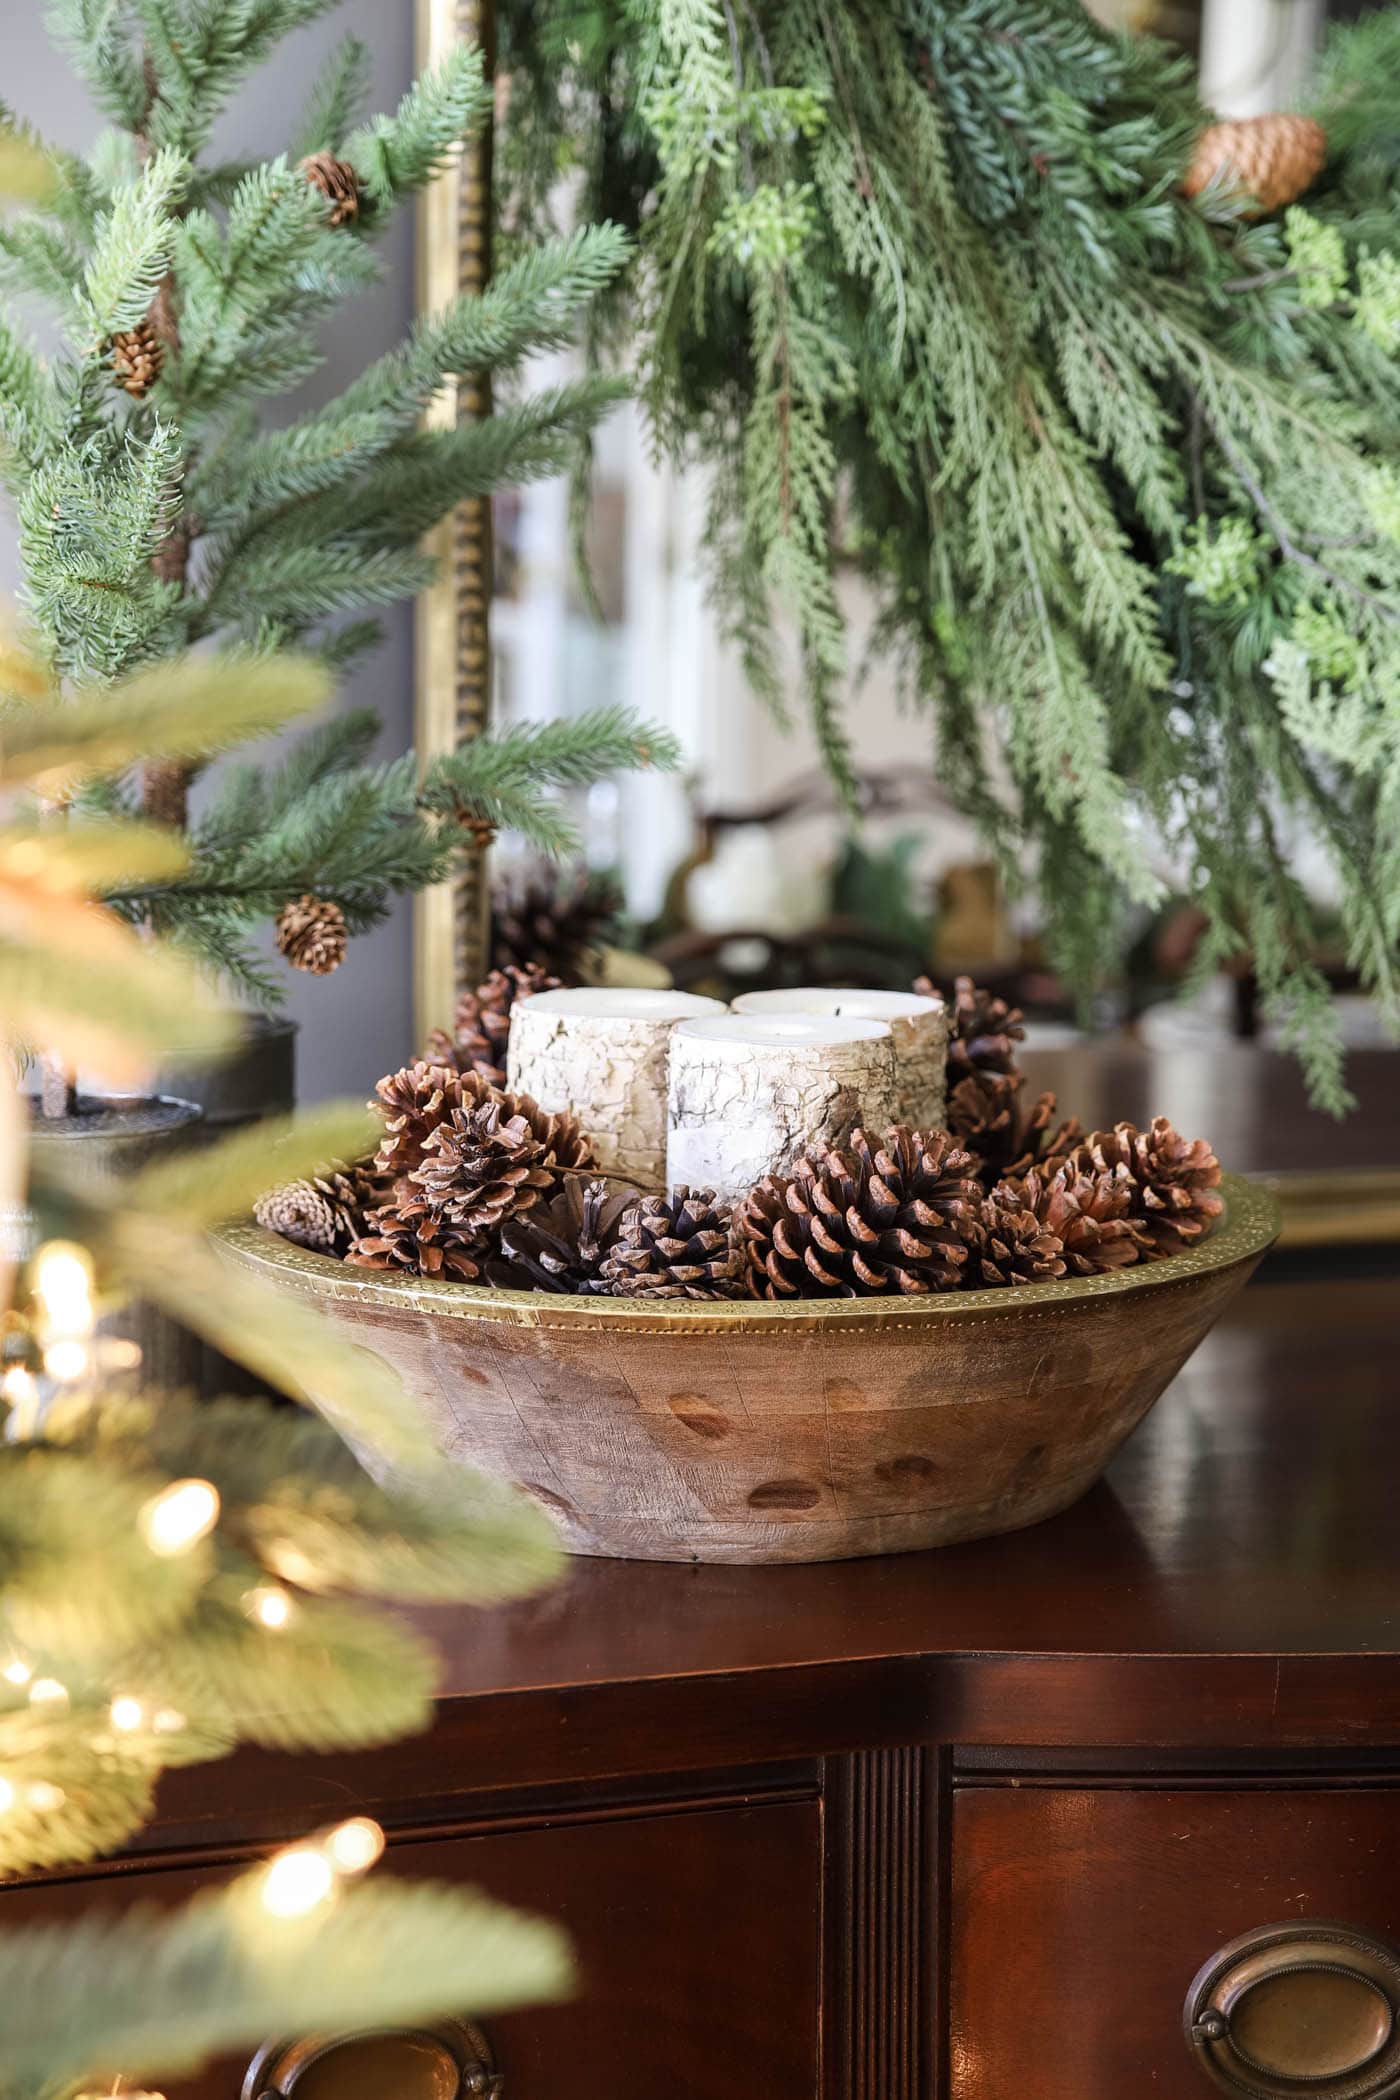 How to Decorate with Winter Decorations for Christmas